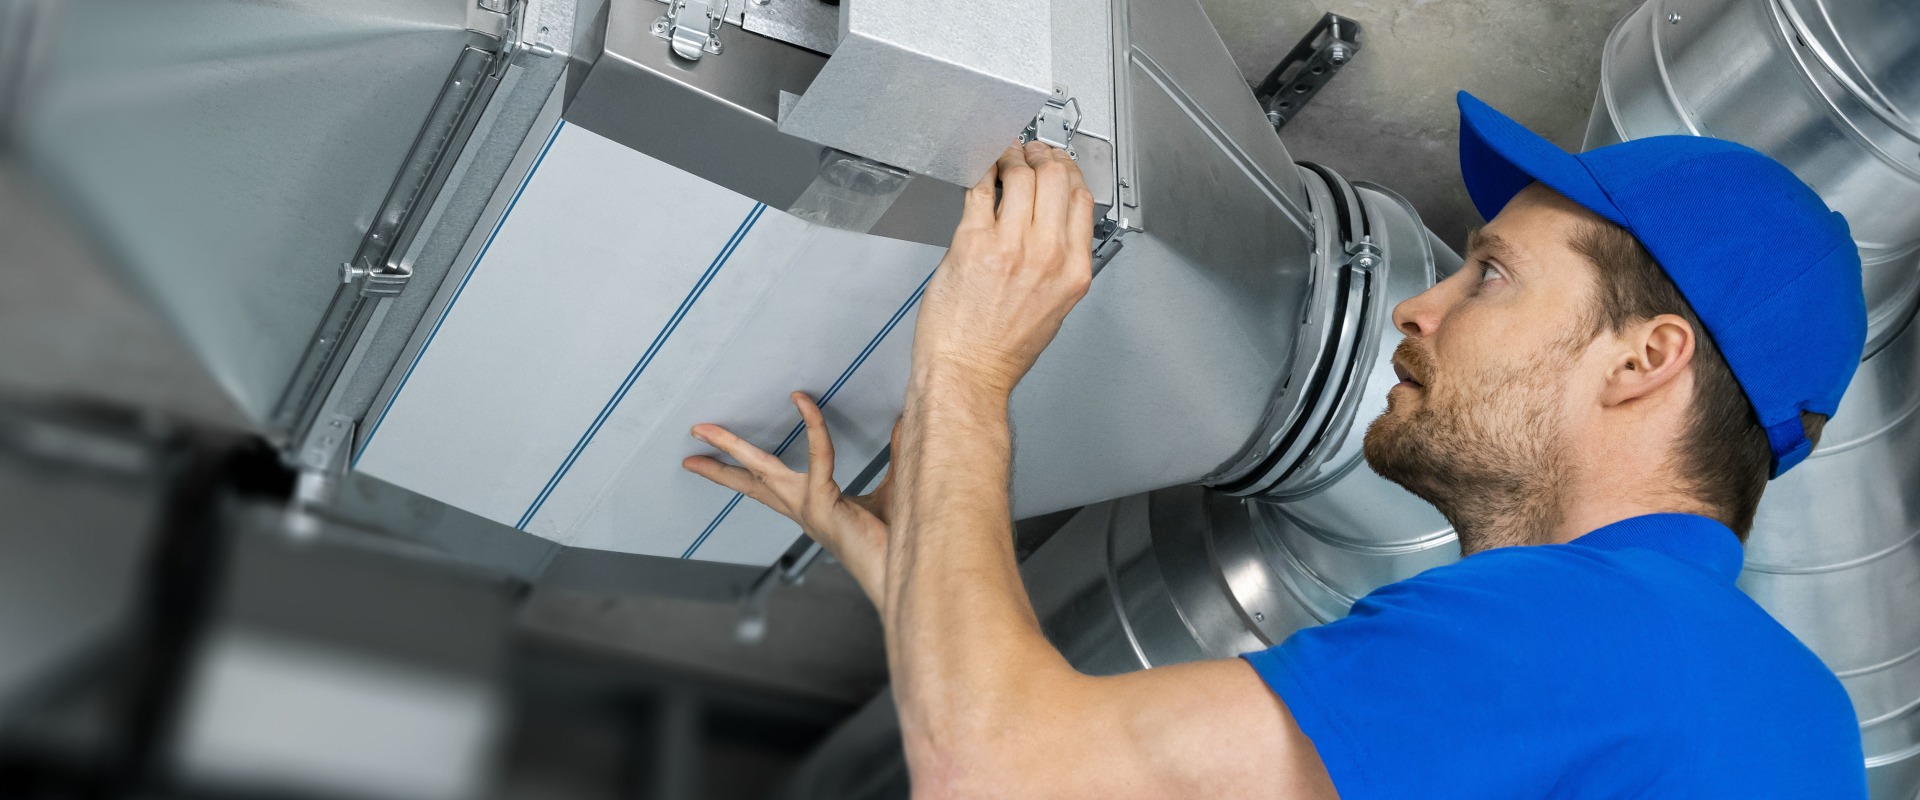 Competent Air Duct Sealing Services in Dania Beach FL